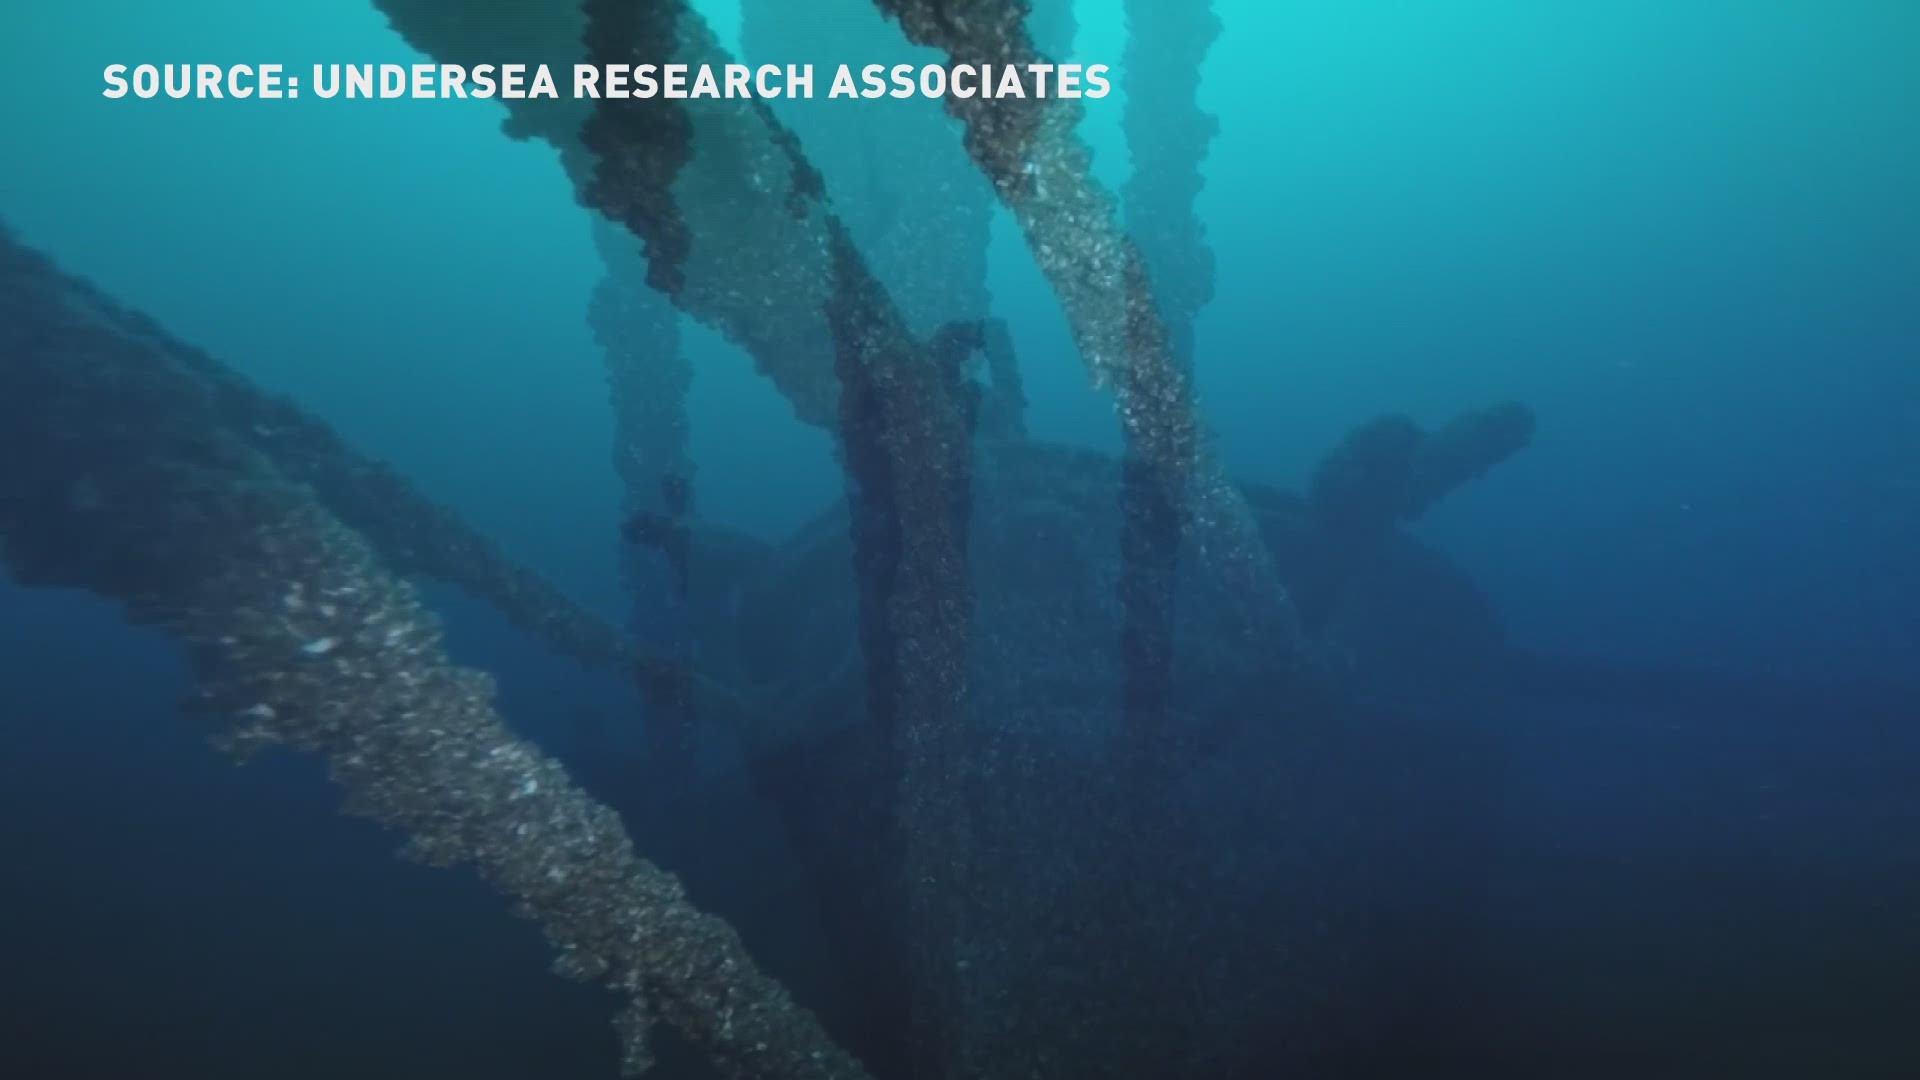 David Trotter and his Undersea Research Associate team of divers, located the schooner Montezuma on side-scan sonar in June 2016. She sits in a depth of 170-feet about 40 miles east of Ocsoda, Michigan, in Lake Huron. The wreck is intact, especially the cabin. The Montezuma sank in 1871 after colliding with another ship – the Hattie Johnson. Thick haze kept the two ships from seeing each other, causing the collision.